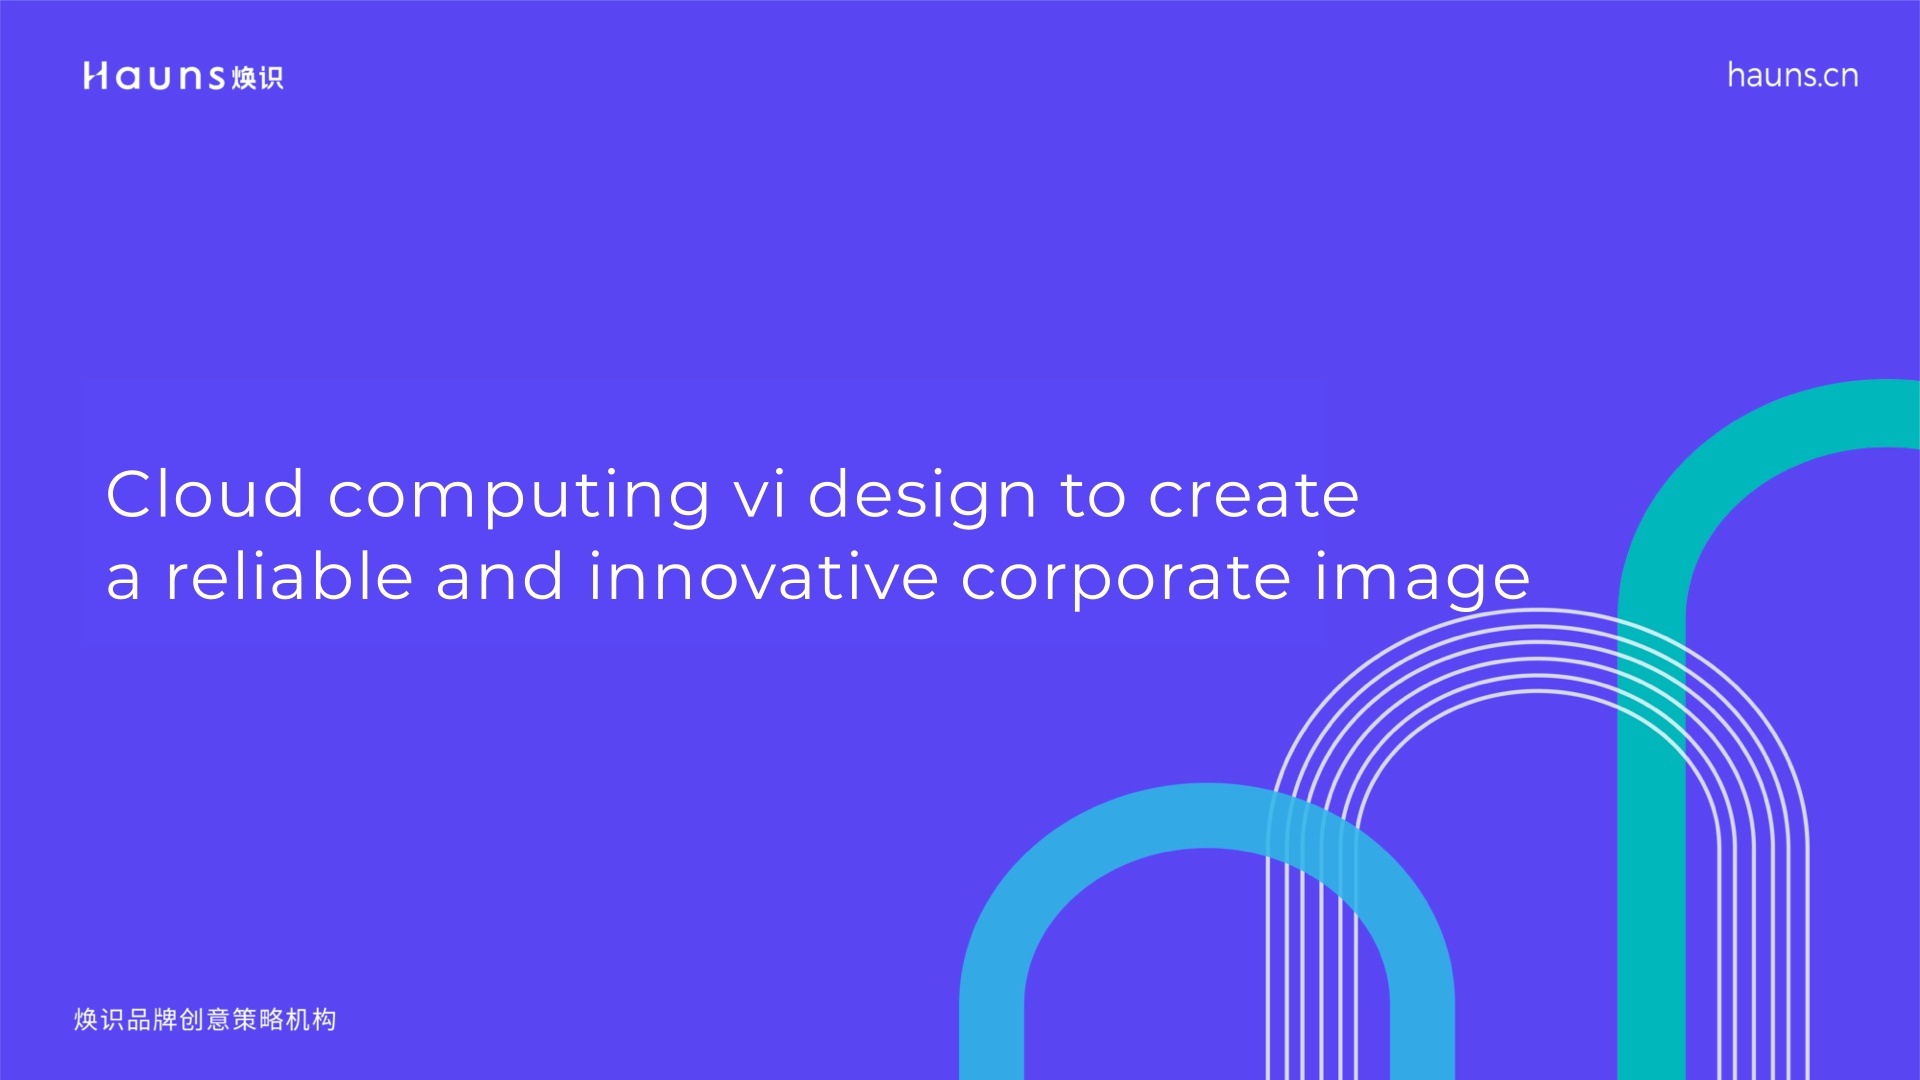 Cloud computing vi design to create a reliable and innovative corporate image